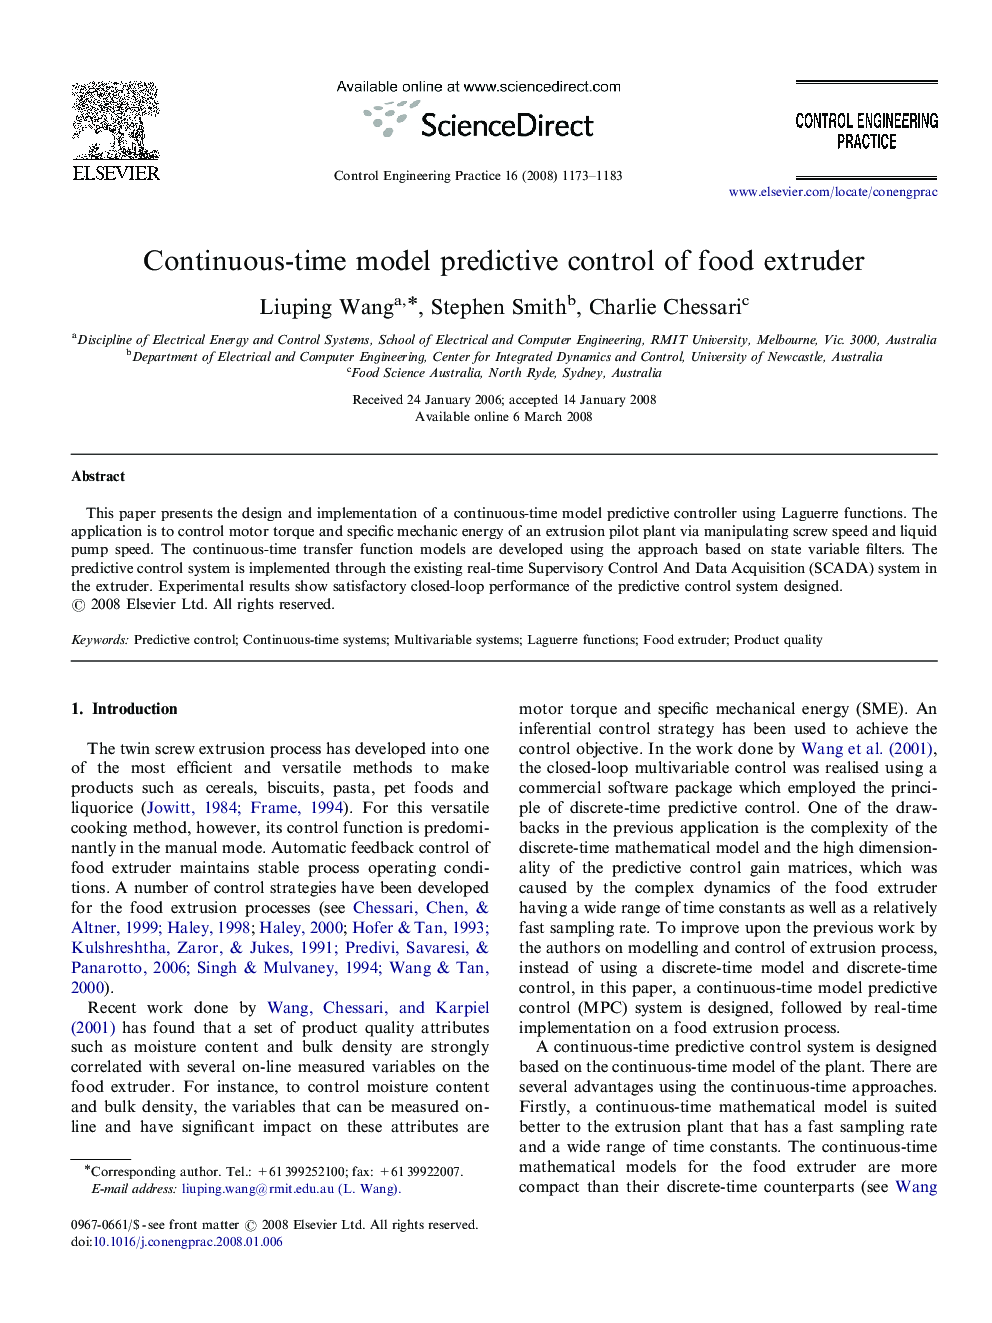 Continuous-time model predictive control of food extruder